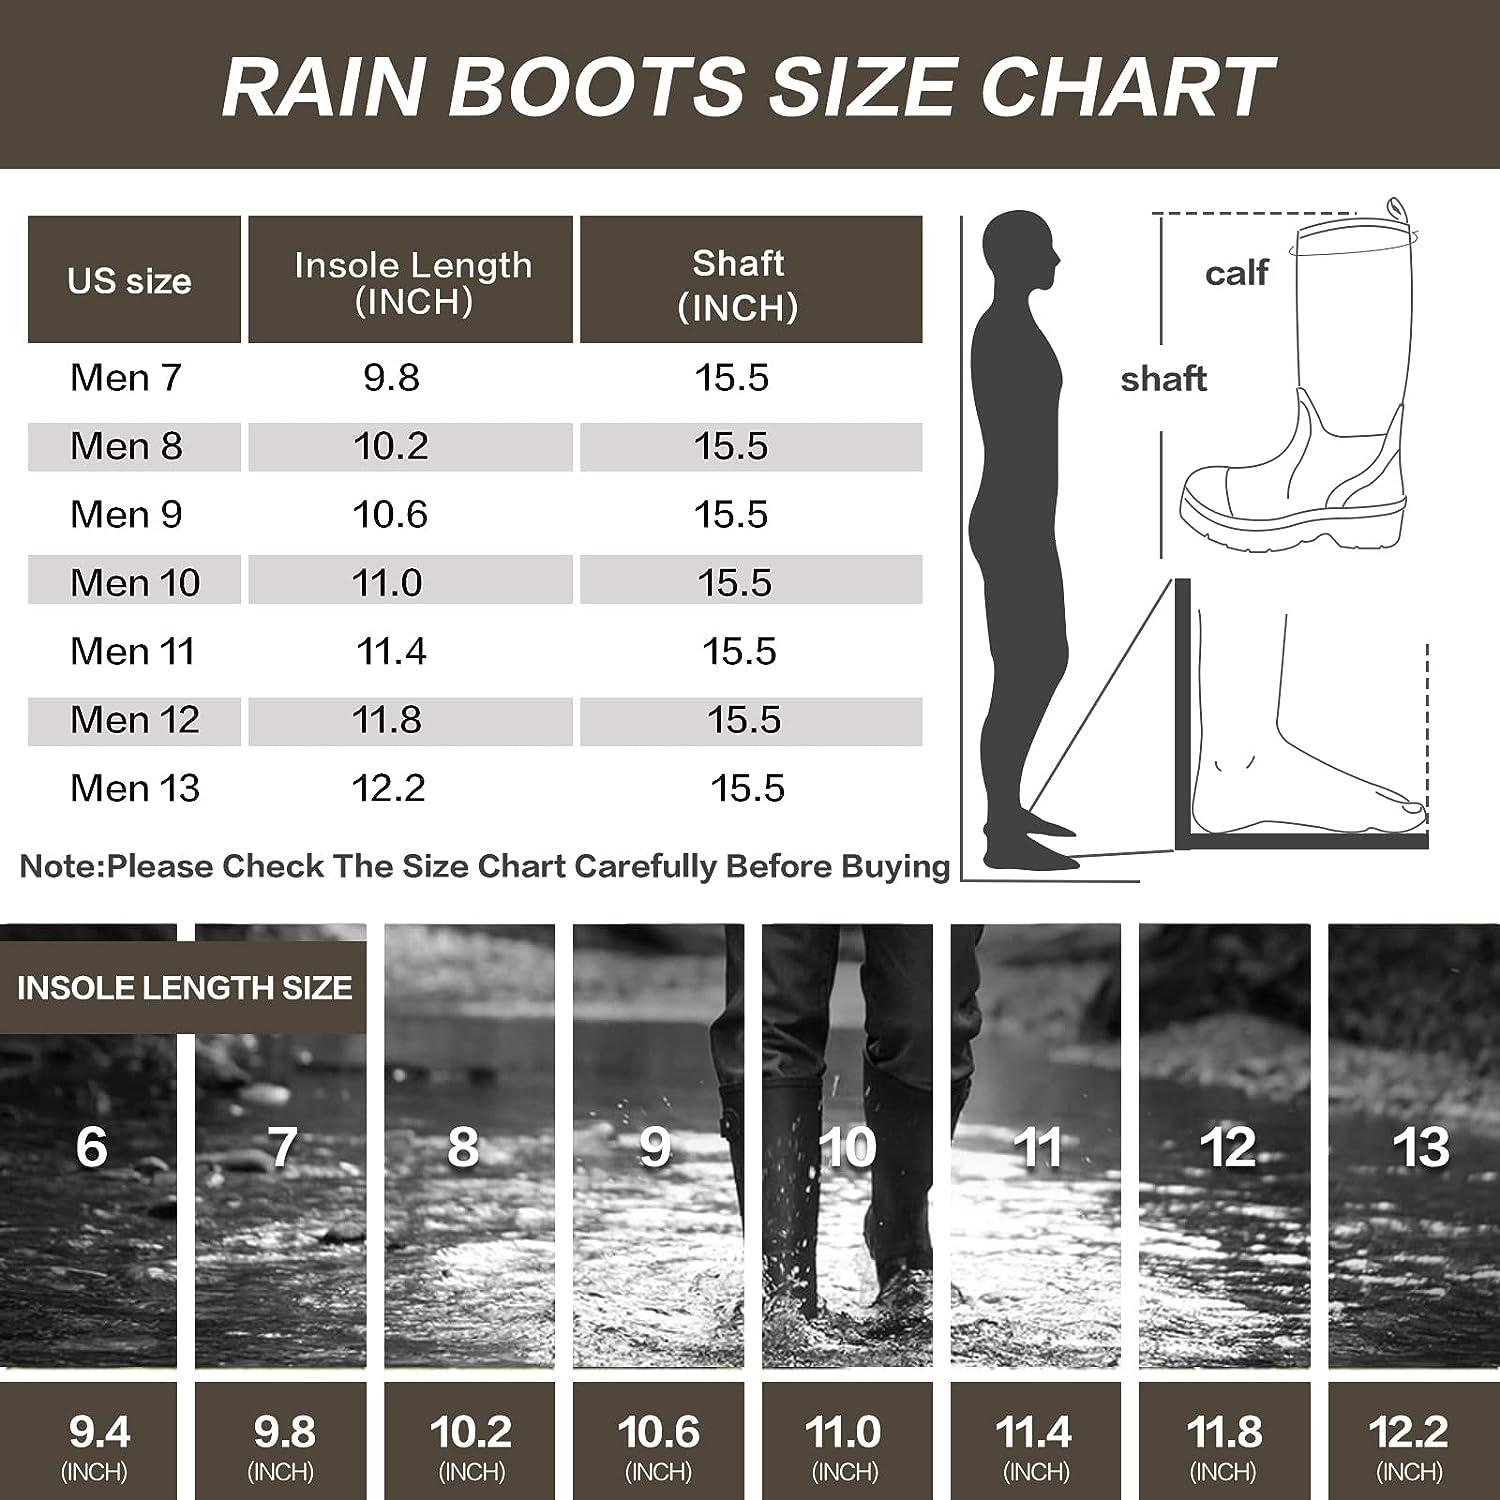 hellorain Rain Boots for Men, 7 mm Neoprene Insulated Rain Boots with Steel  Shank, Waterproof Mid Calf Hunting Boots, Durable Rubber Work Boots for  Farming Gardening Fishing 12 Wide Camo